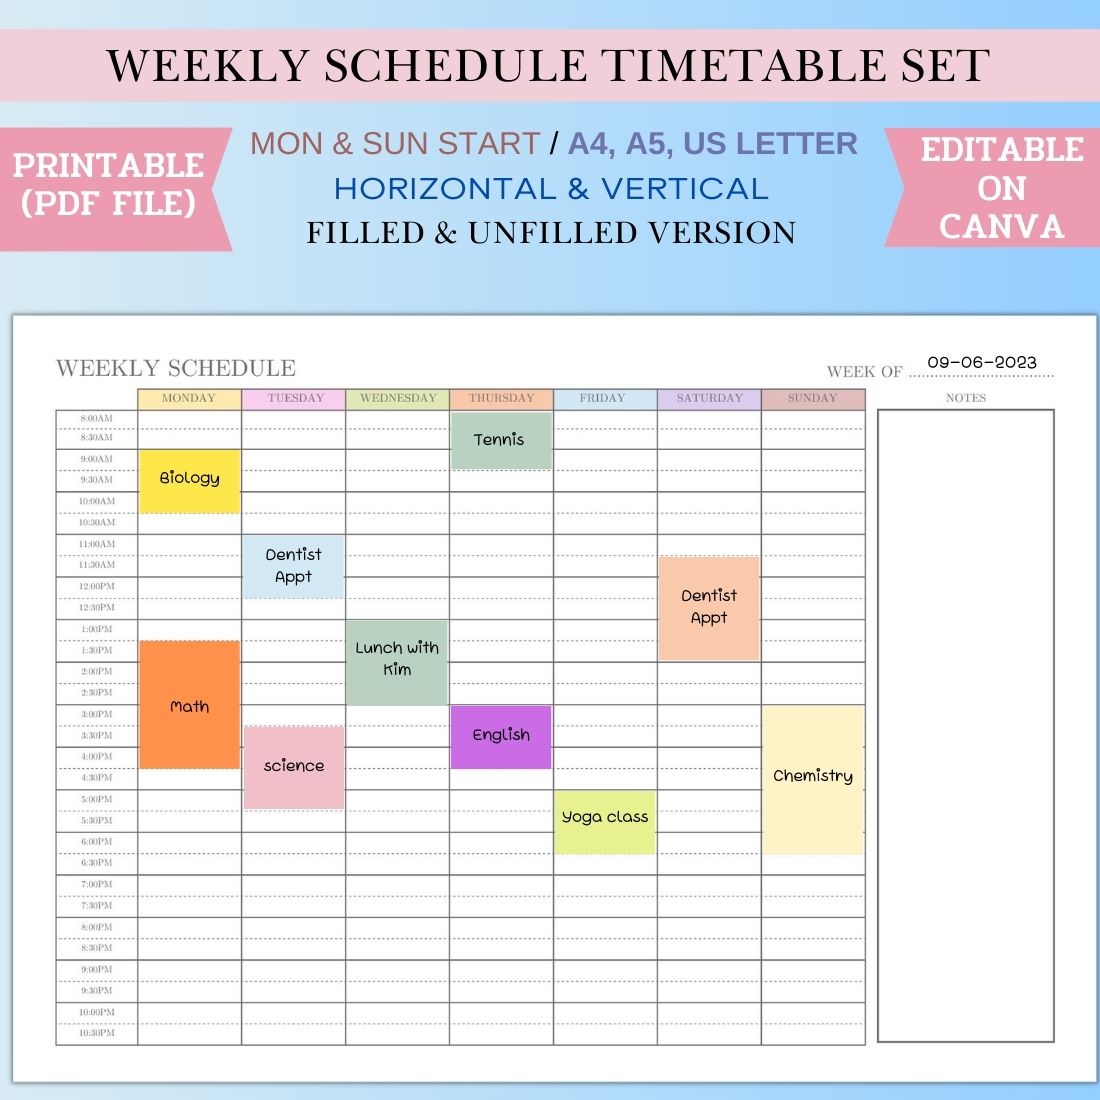 Minimalist Weekly Schedule preview image.